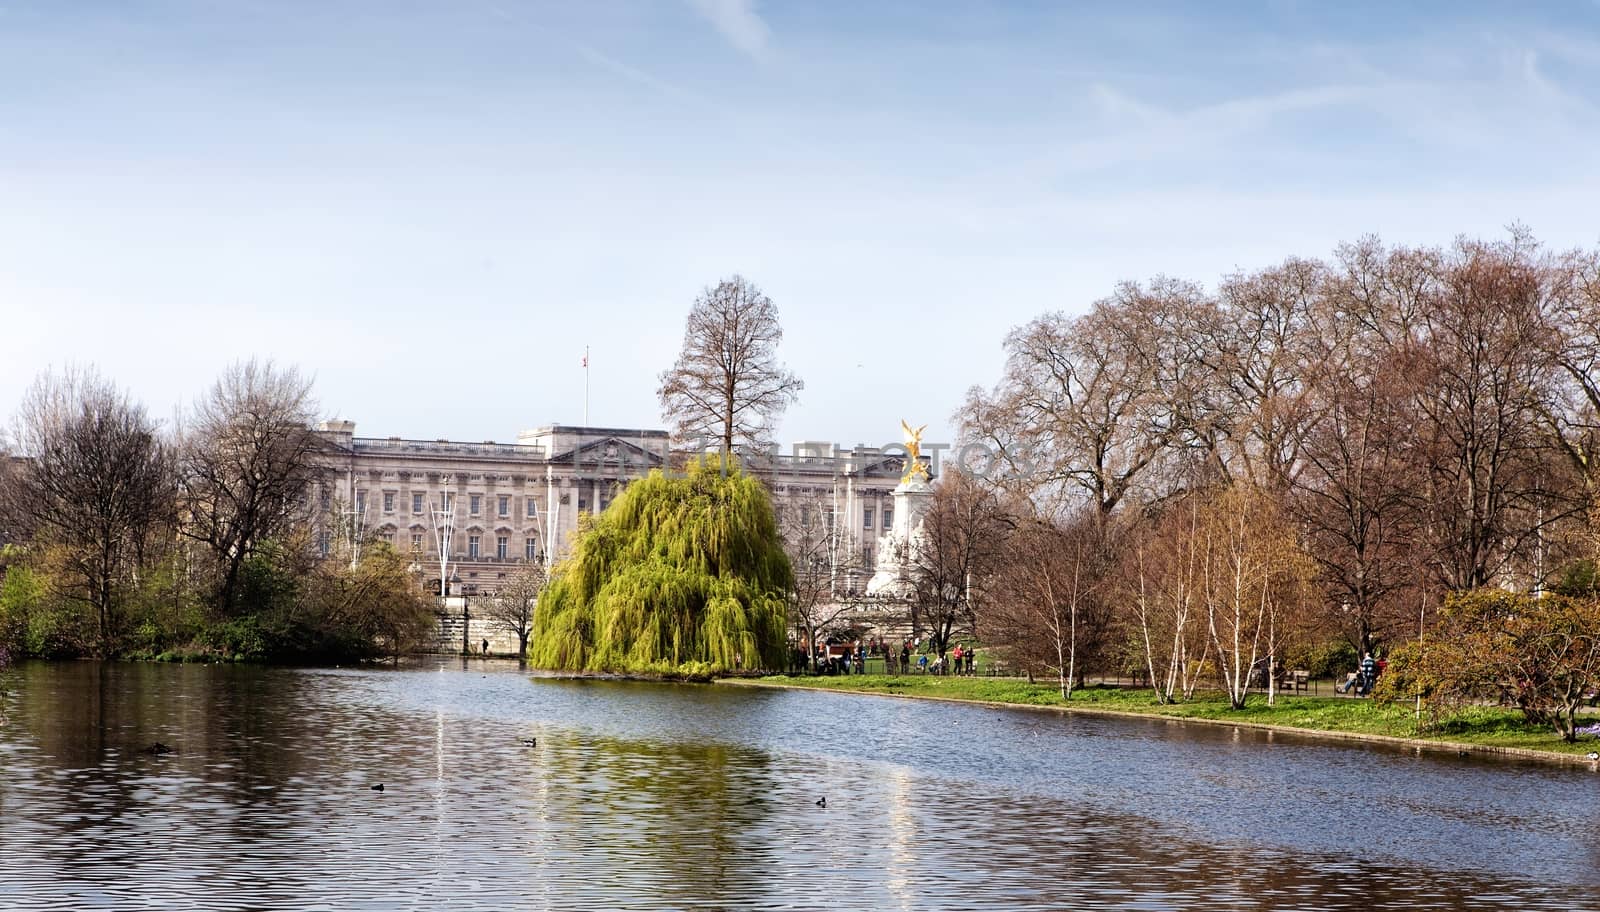 View of Buckingham Palace from St James park in London